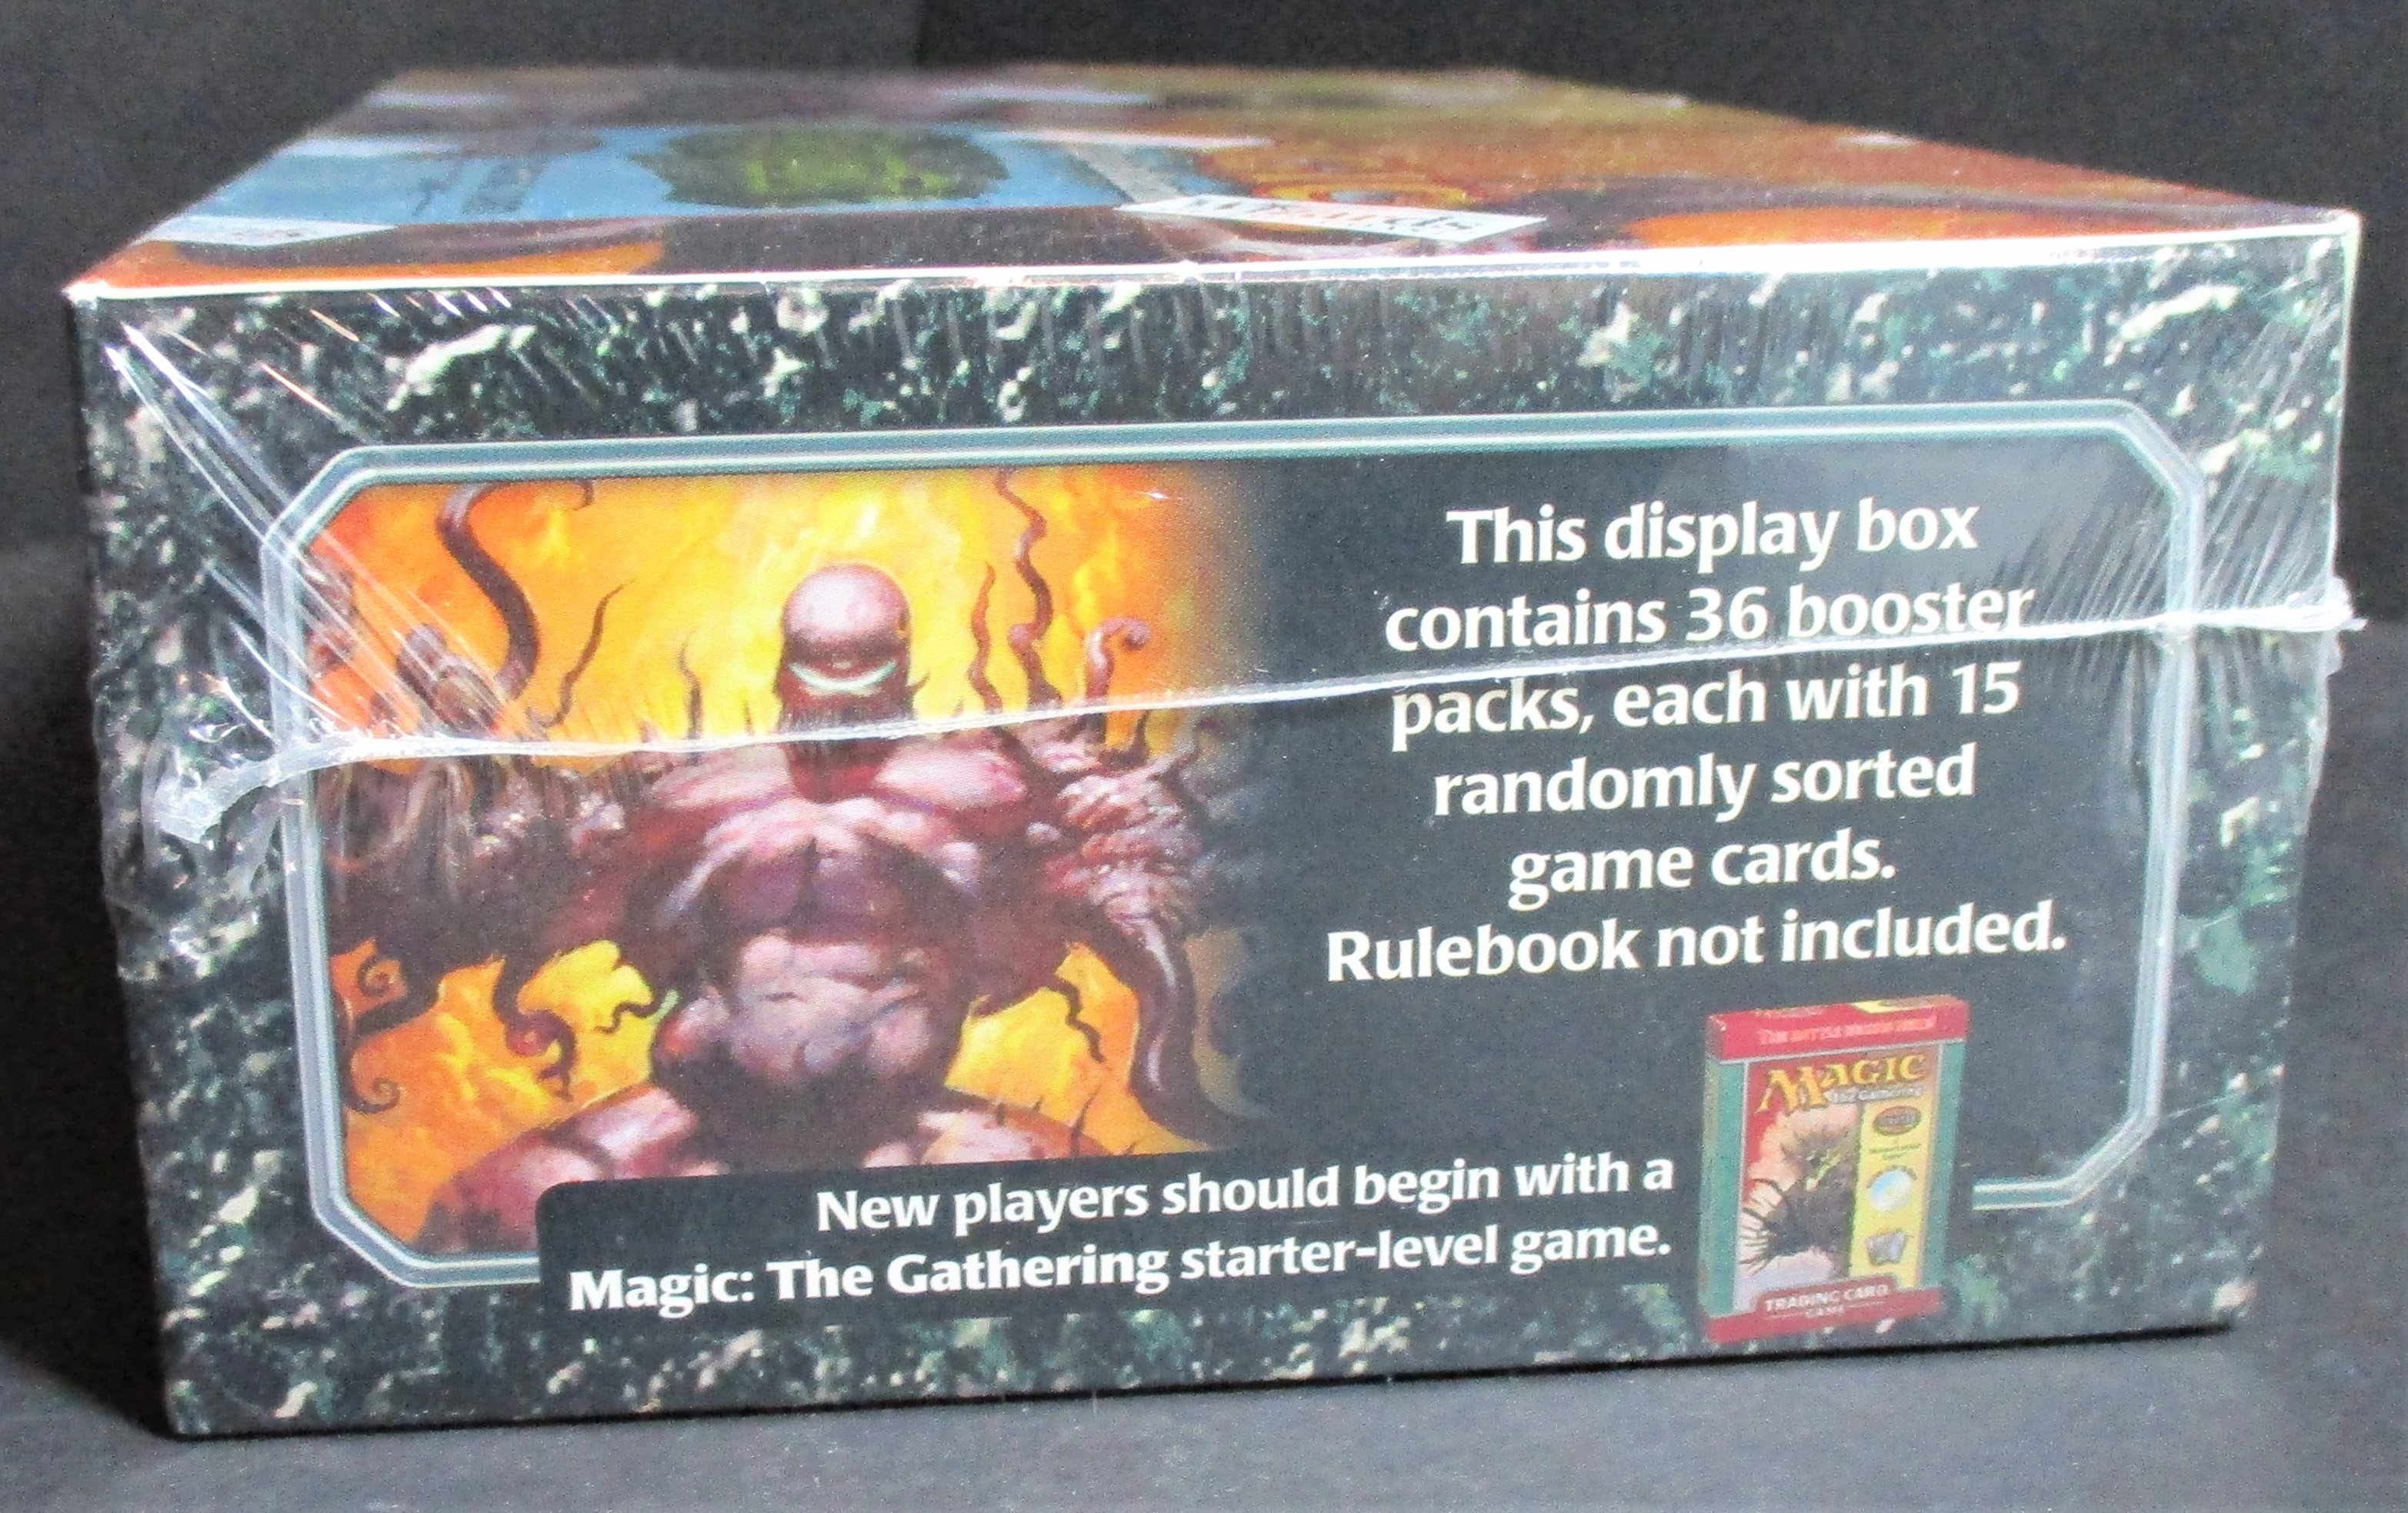 Torment Booster Box (SEALED)